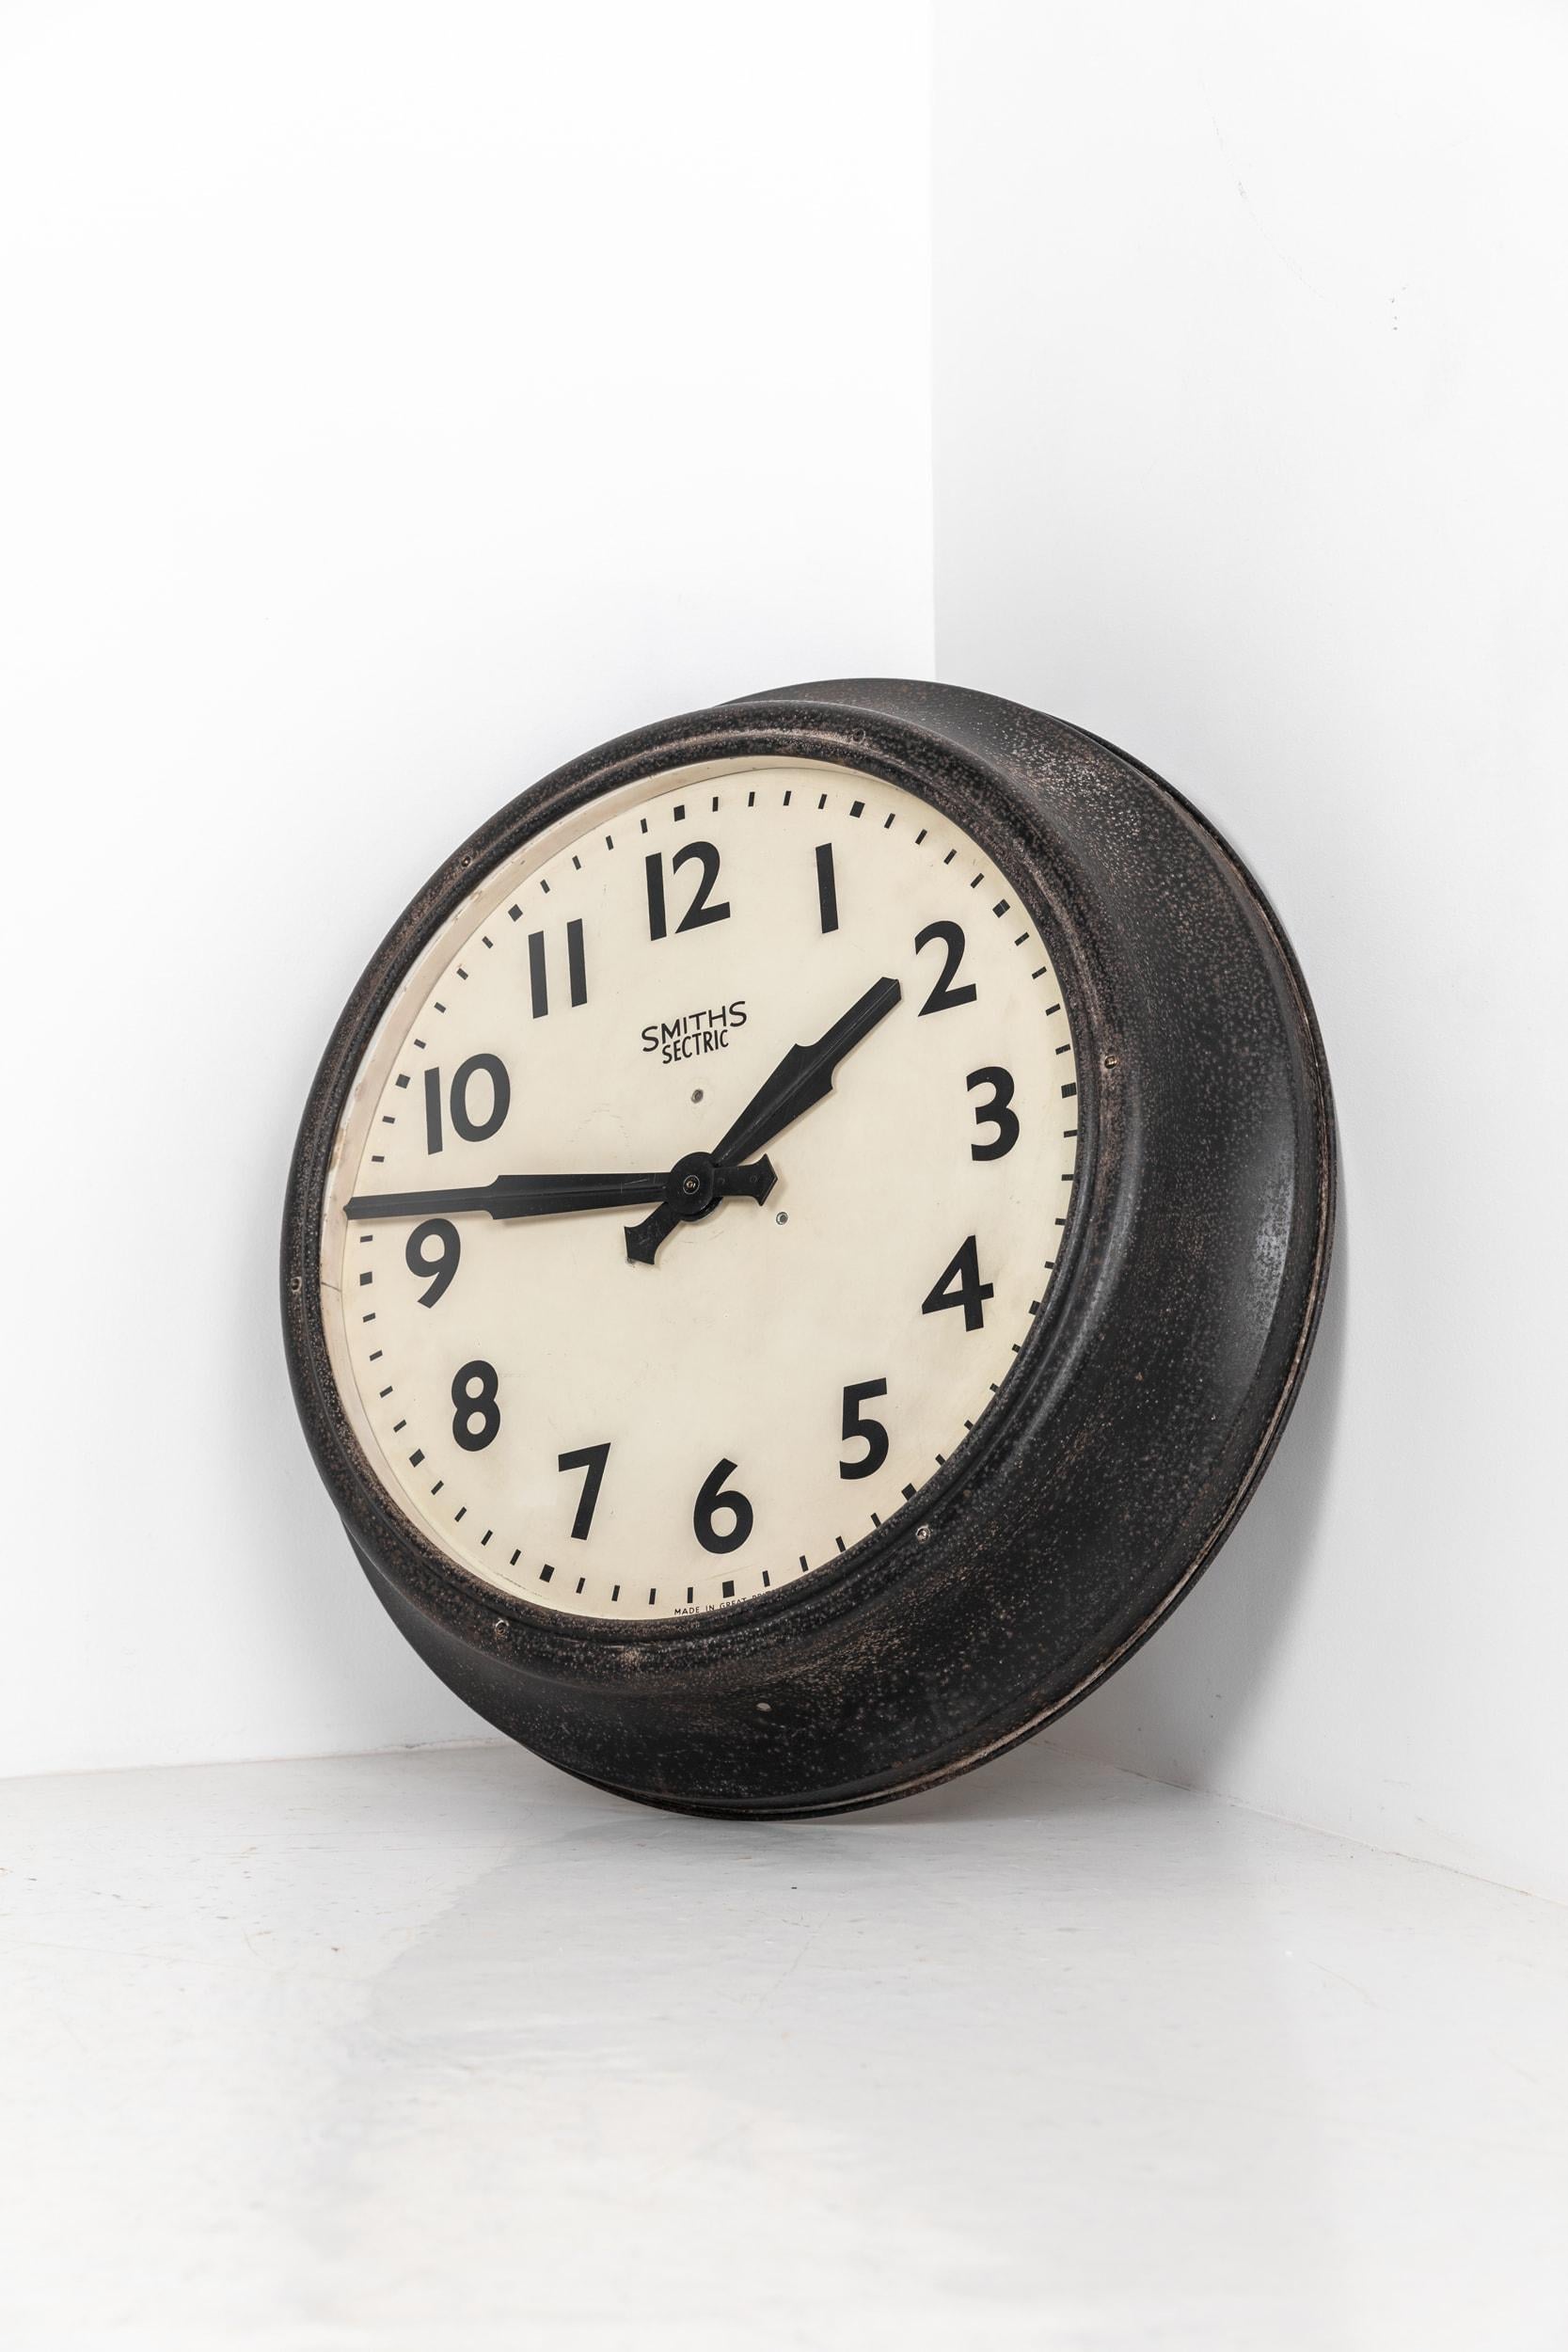 Large Vintage Industrial Art Deco Metal Smiths Electric Wall Clock, circa 1950 In Fair Condition For Sale In London, GB